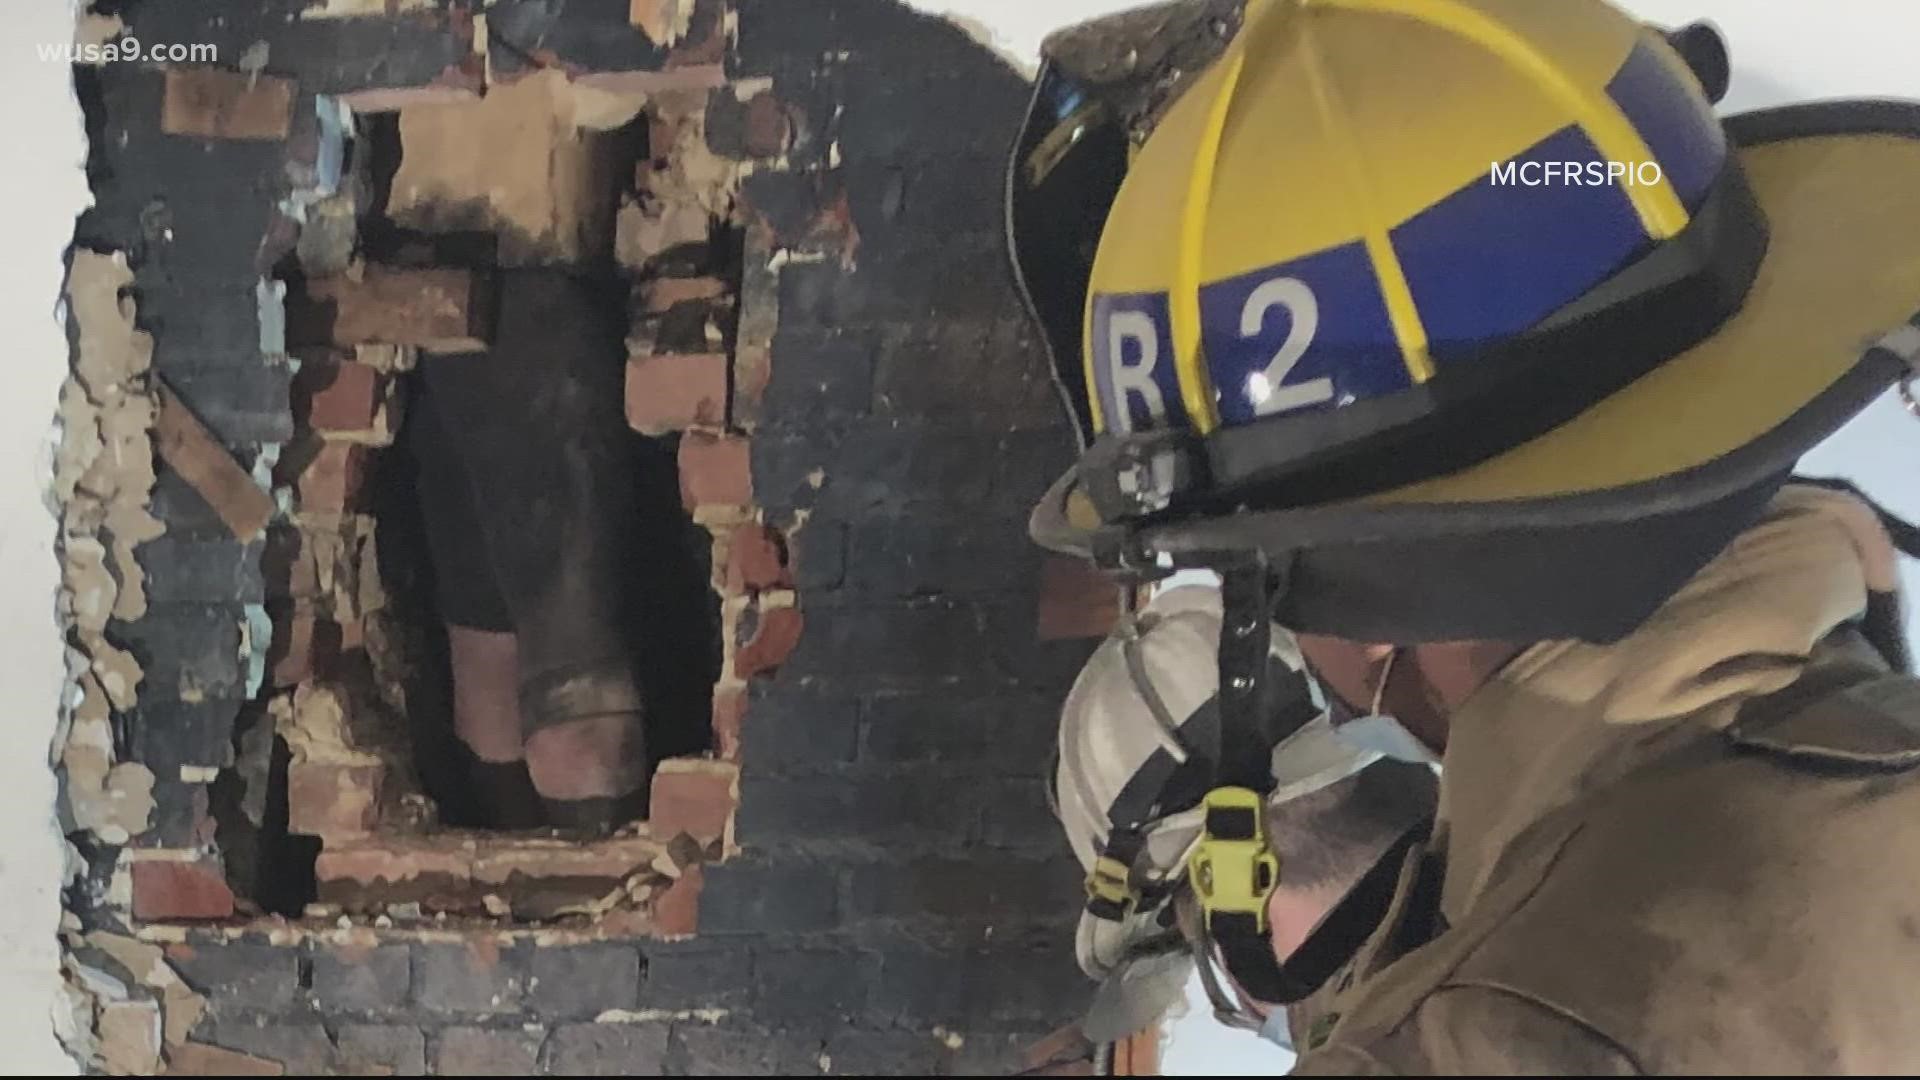 A man was extricated from a chimney at a Silver Spring house that he doesn't live in on Saturday morning. Police escorted him to a nearby trauma center.